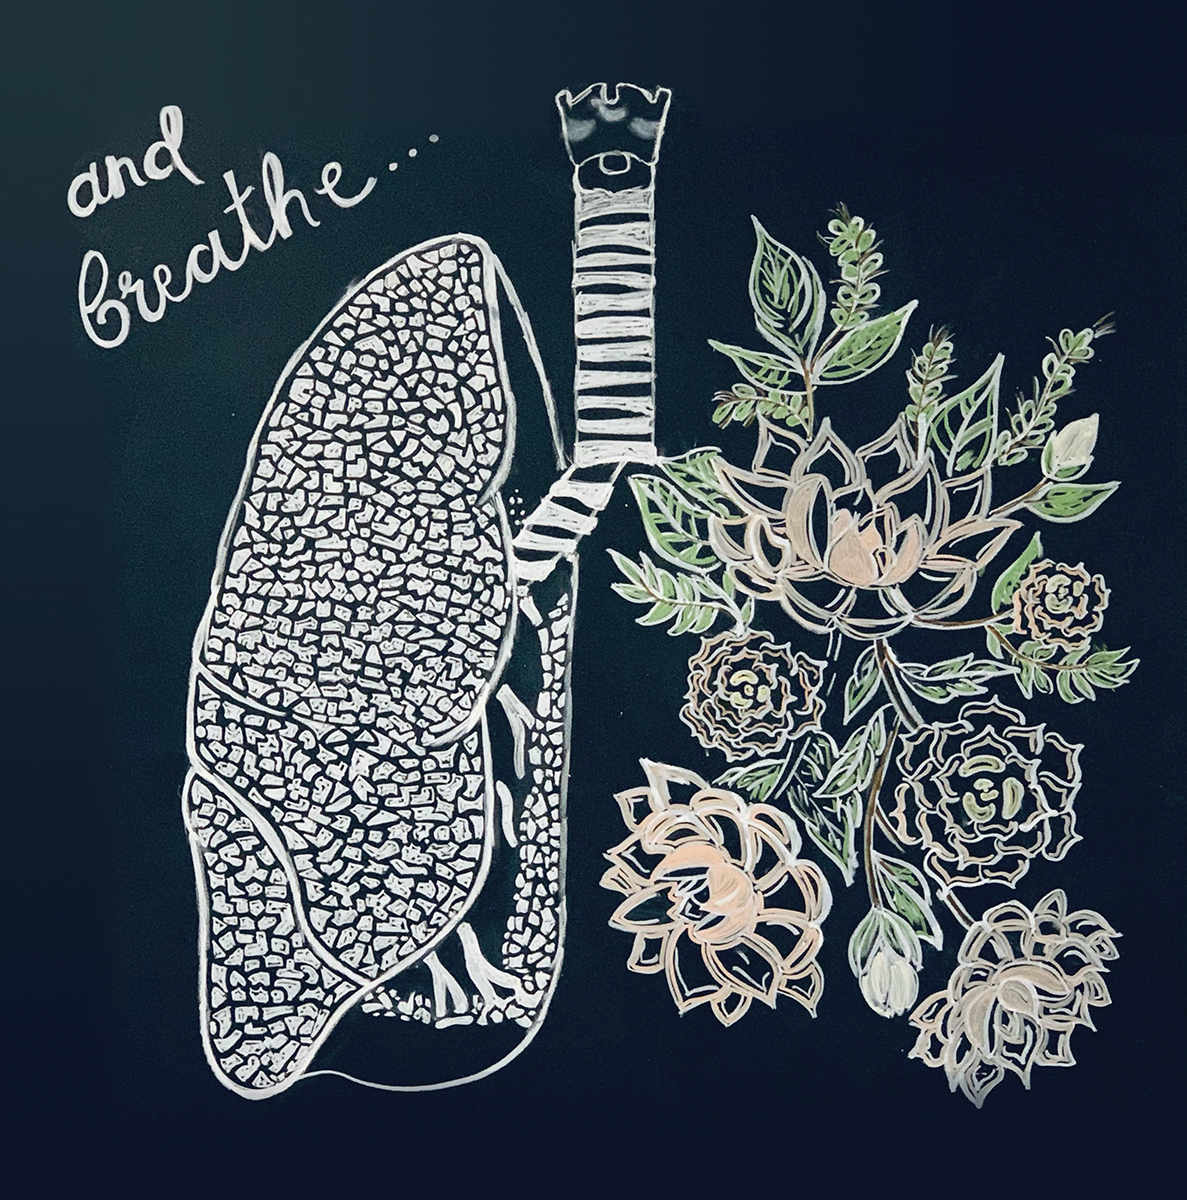 A chalkboard-style drawing of the lungs, with one side replaced by a bunch of flowers